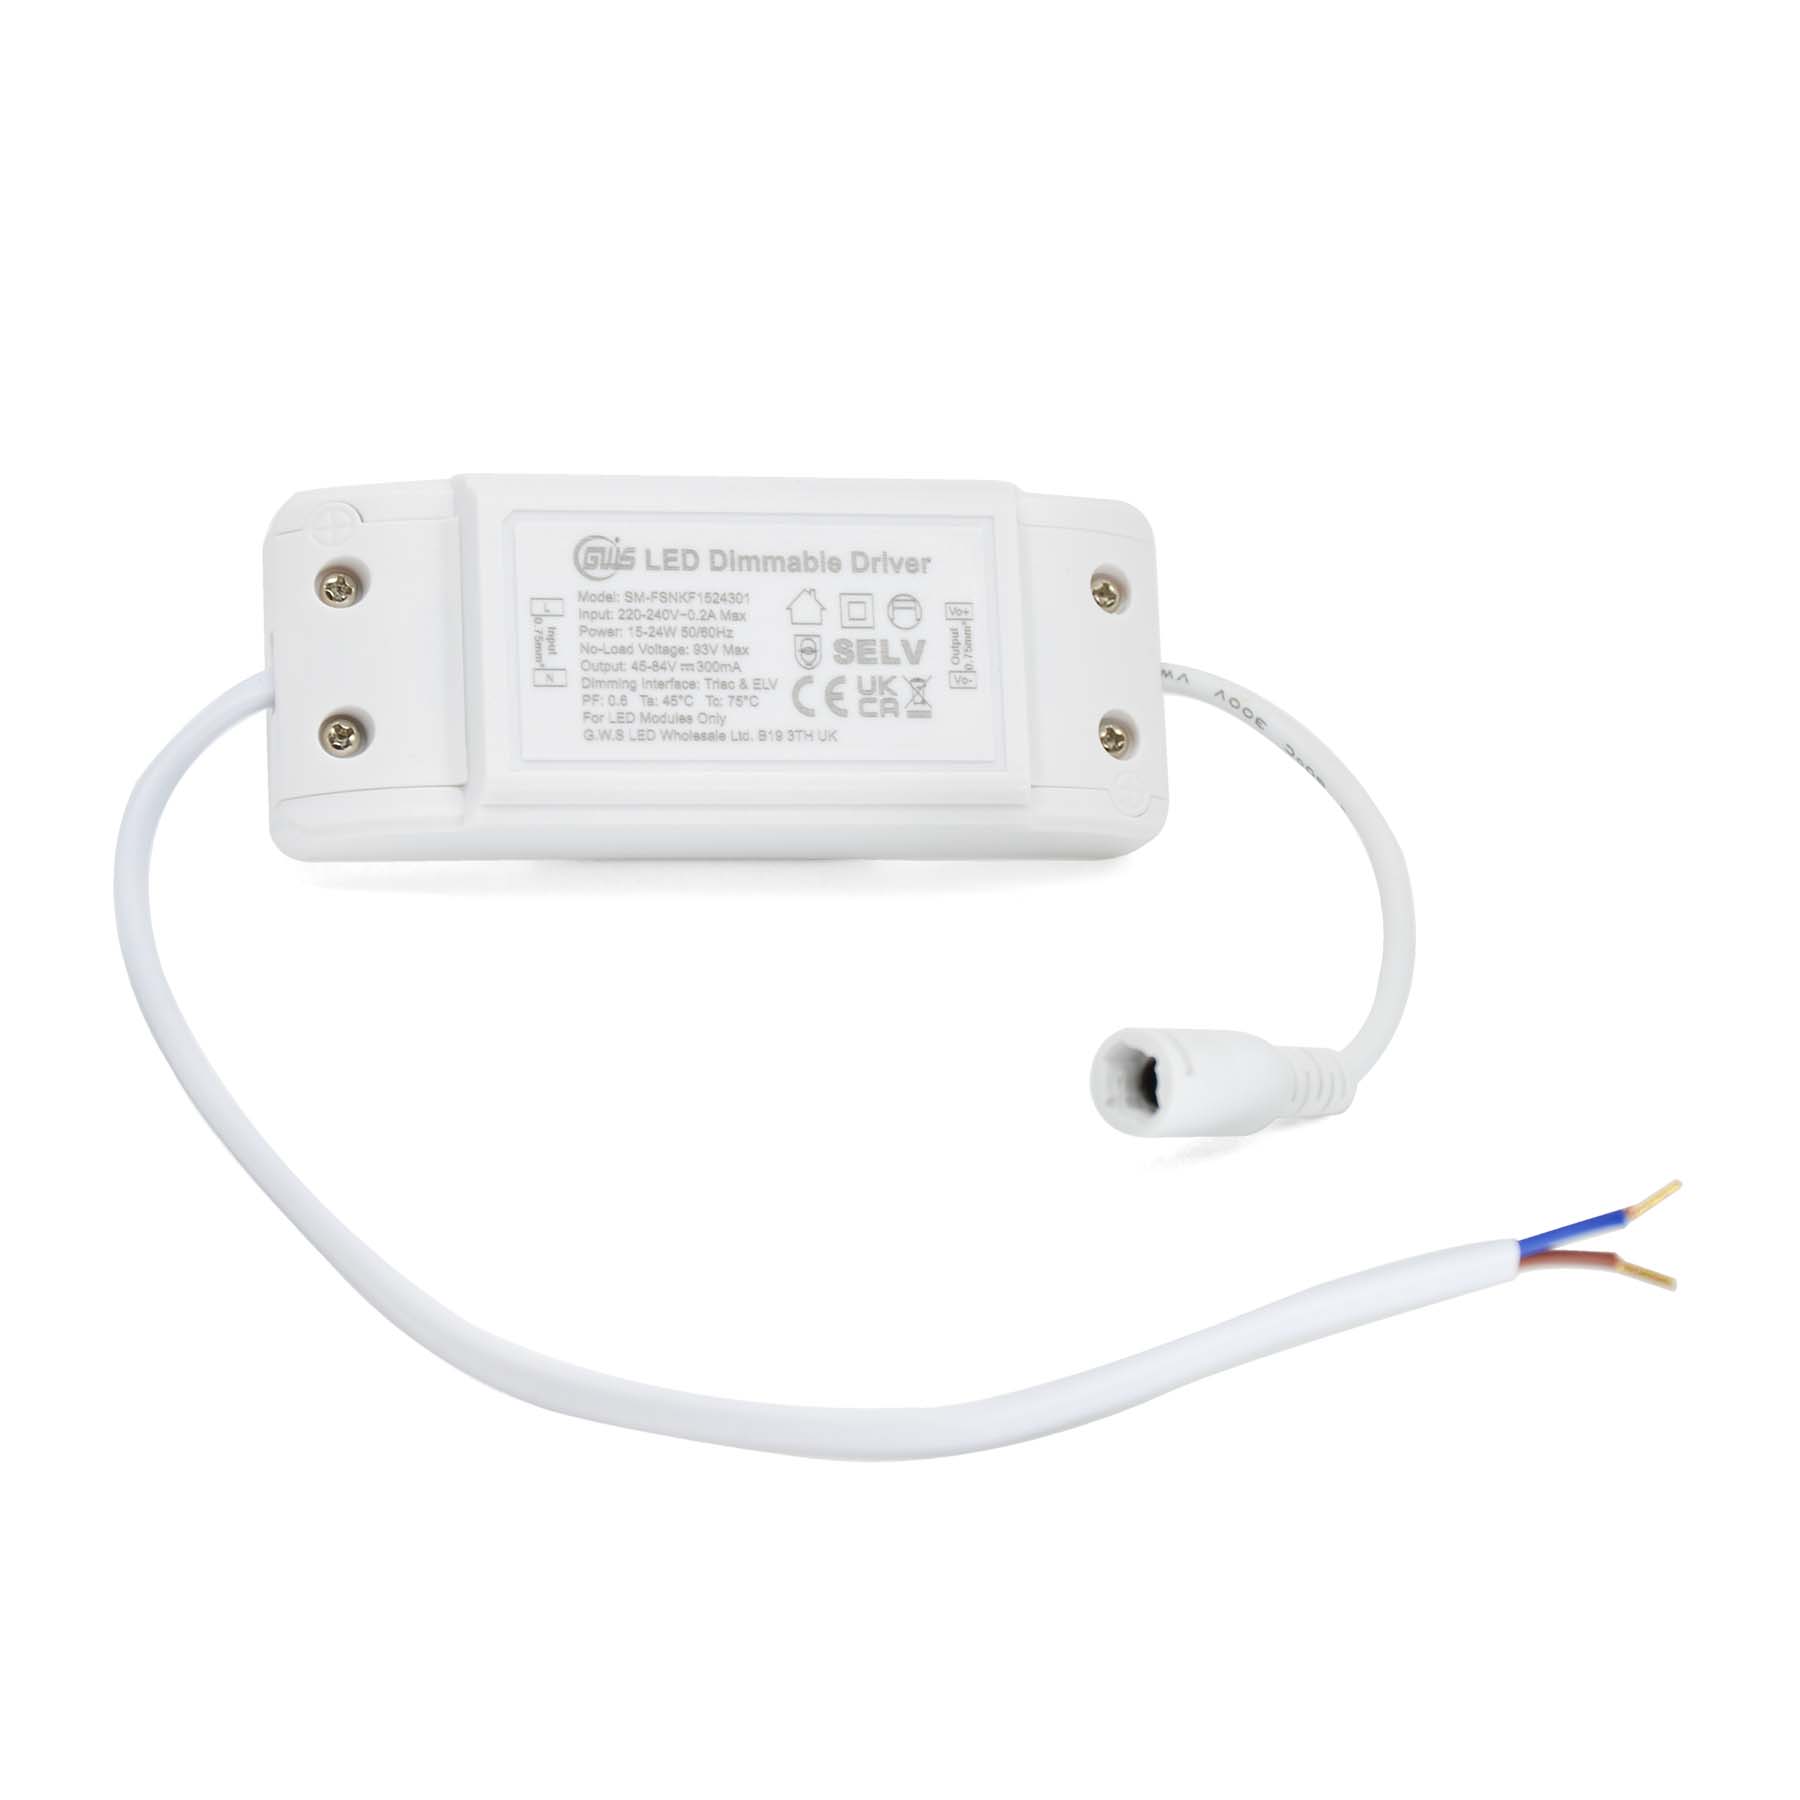 G.W.S LED Wholesale LED Drivers/LED Power Supplies 15-24W Triac Constant Current LED Dimmable Driver